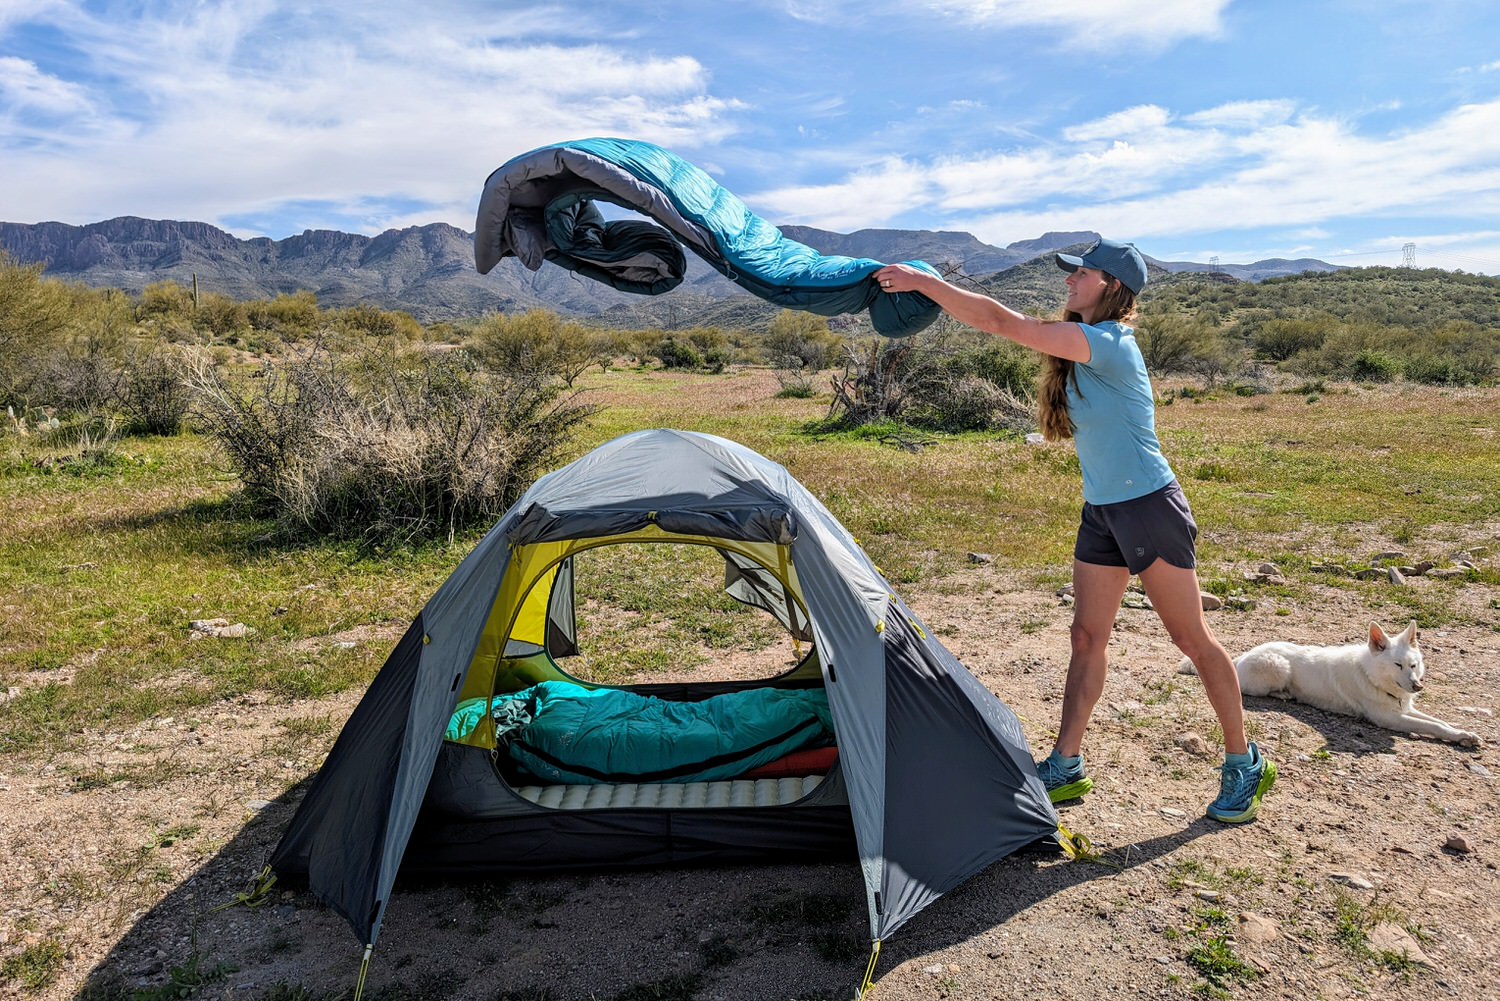 A woman unfurling the Mountain Hardwear Phantom 0 backpacking sleeping bag over a tent with a beautiful mountain view behind her.